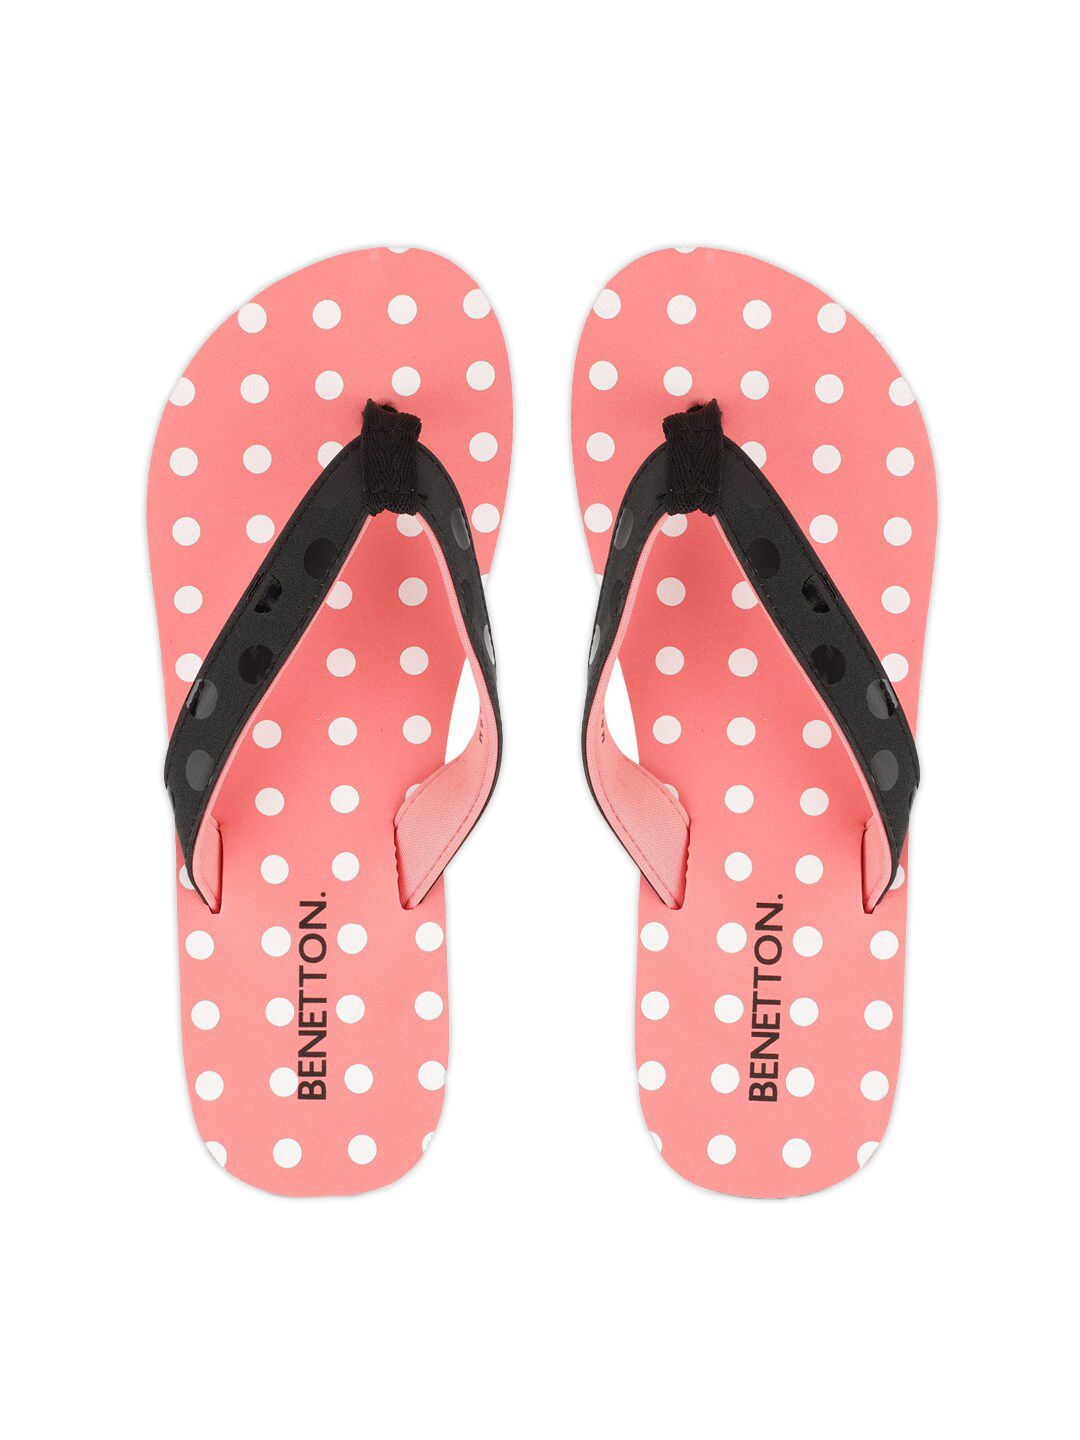 United Colors of Benetton Women Peach & Black Polka Dots Flip Flops Price in India